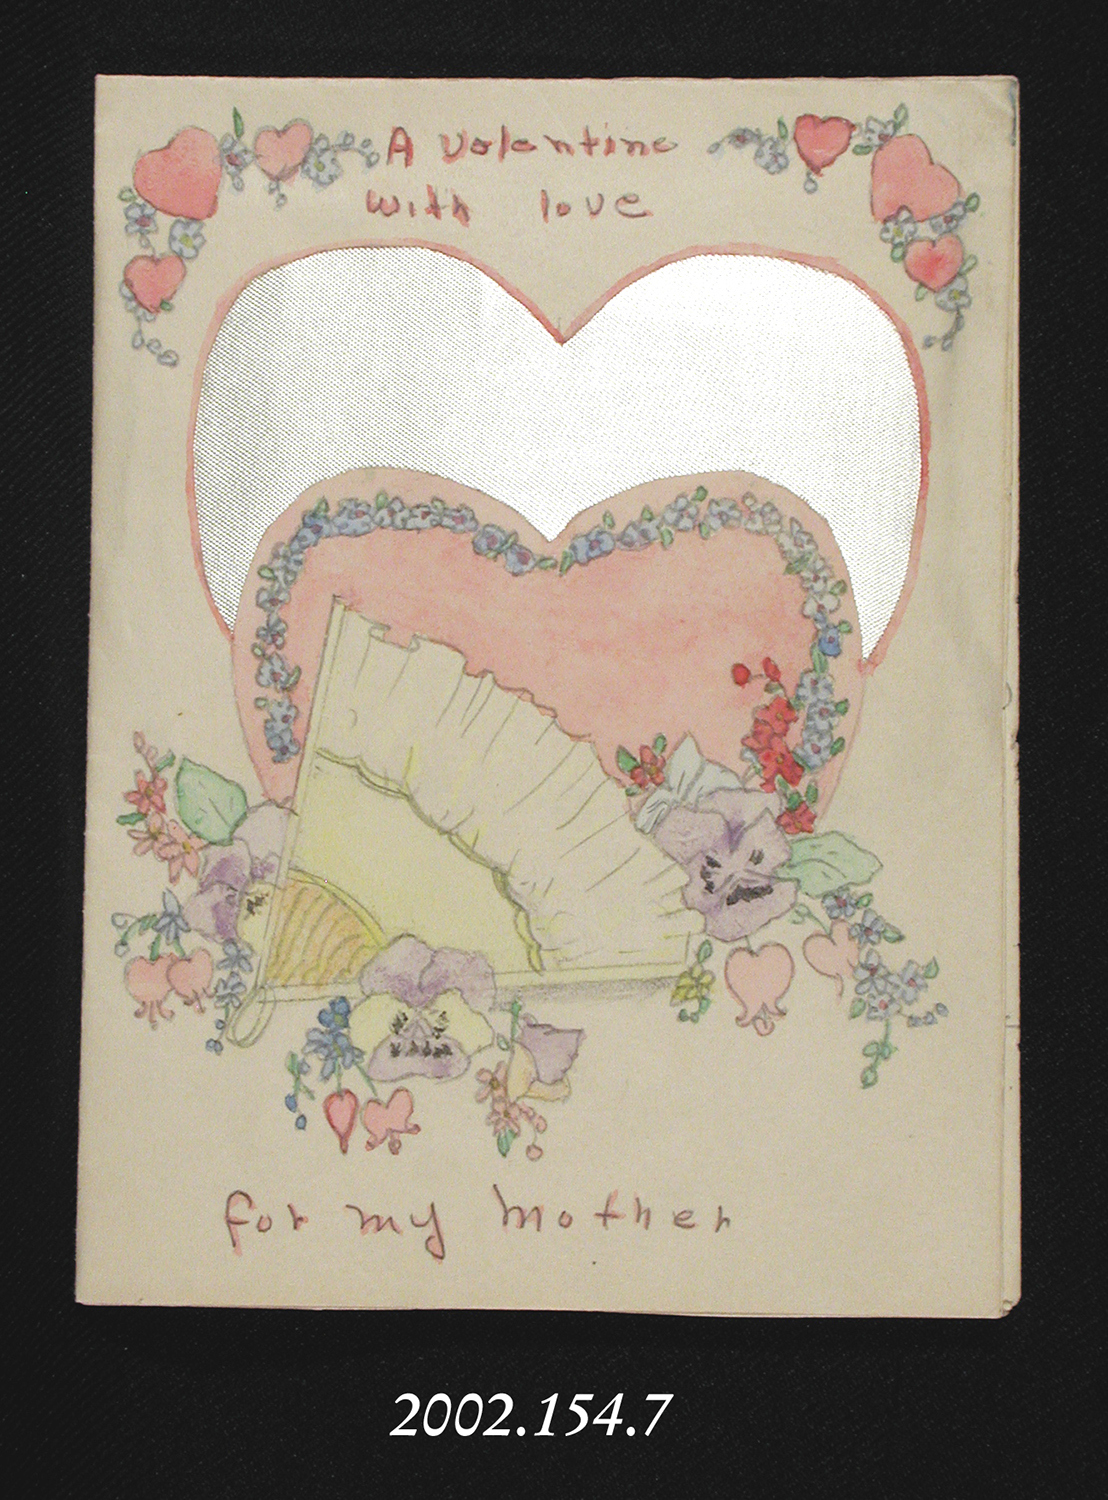 A hand-made Valentine card reading: "A Valentine with love for my Mother."